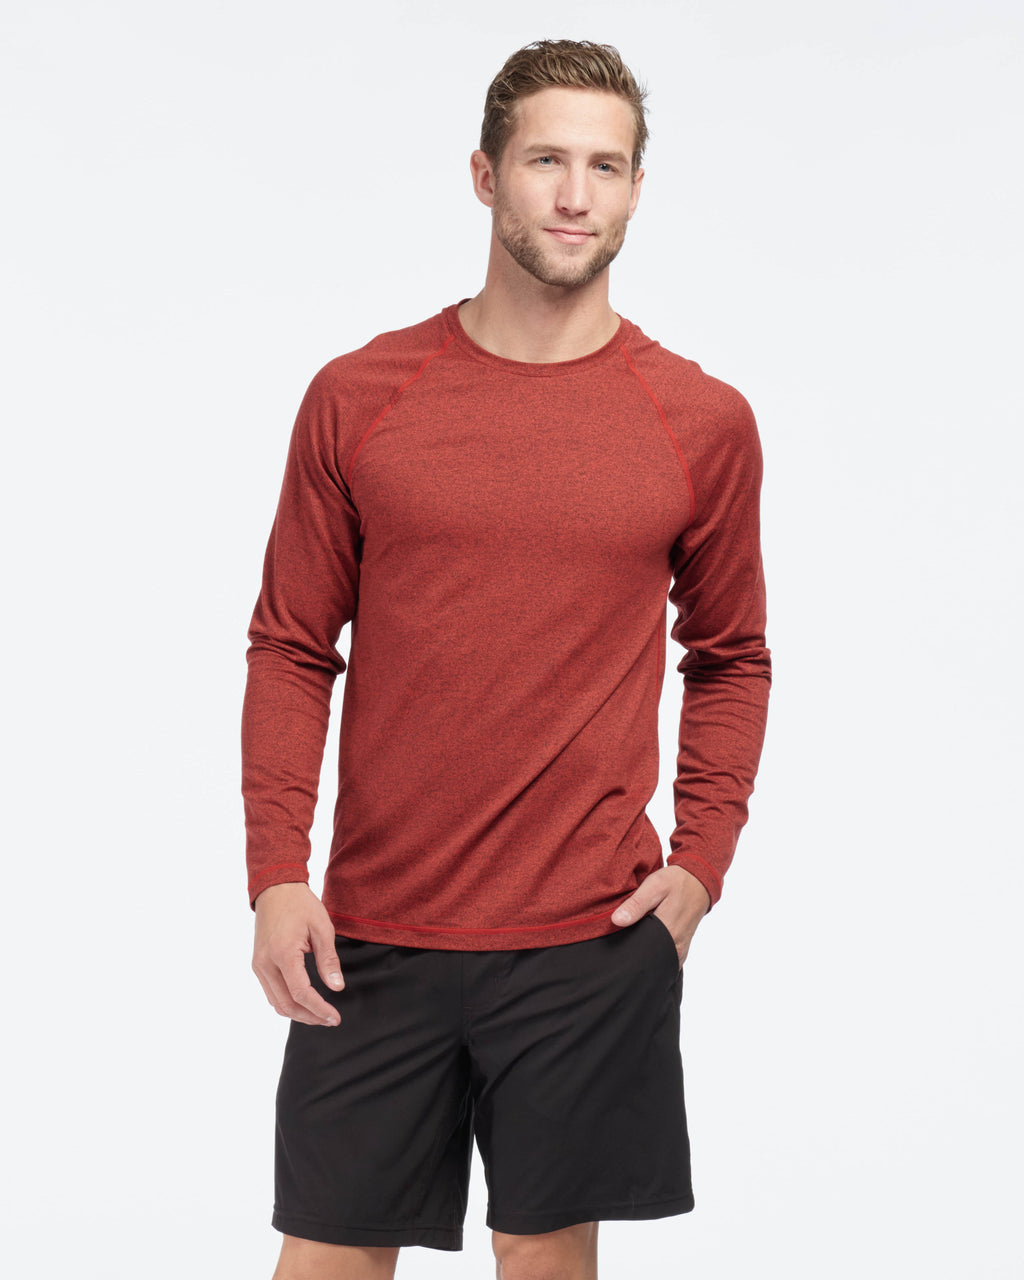 Reign Long Sleeve, Cherry Red Heather